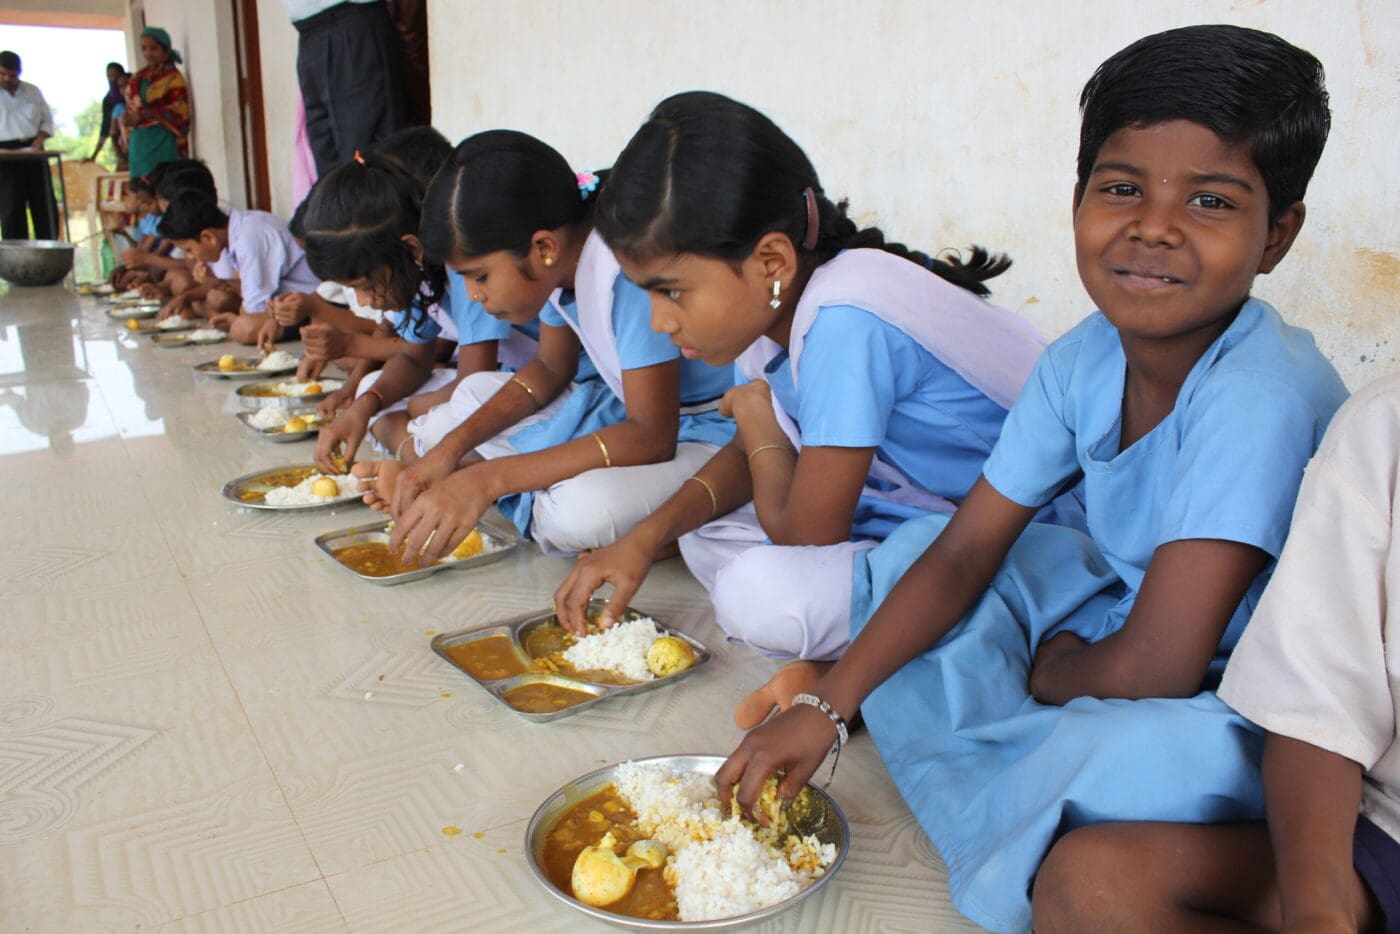 Young girls in blue school uniforms sit on the floor to eat a meal.